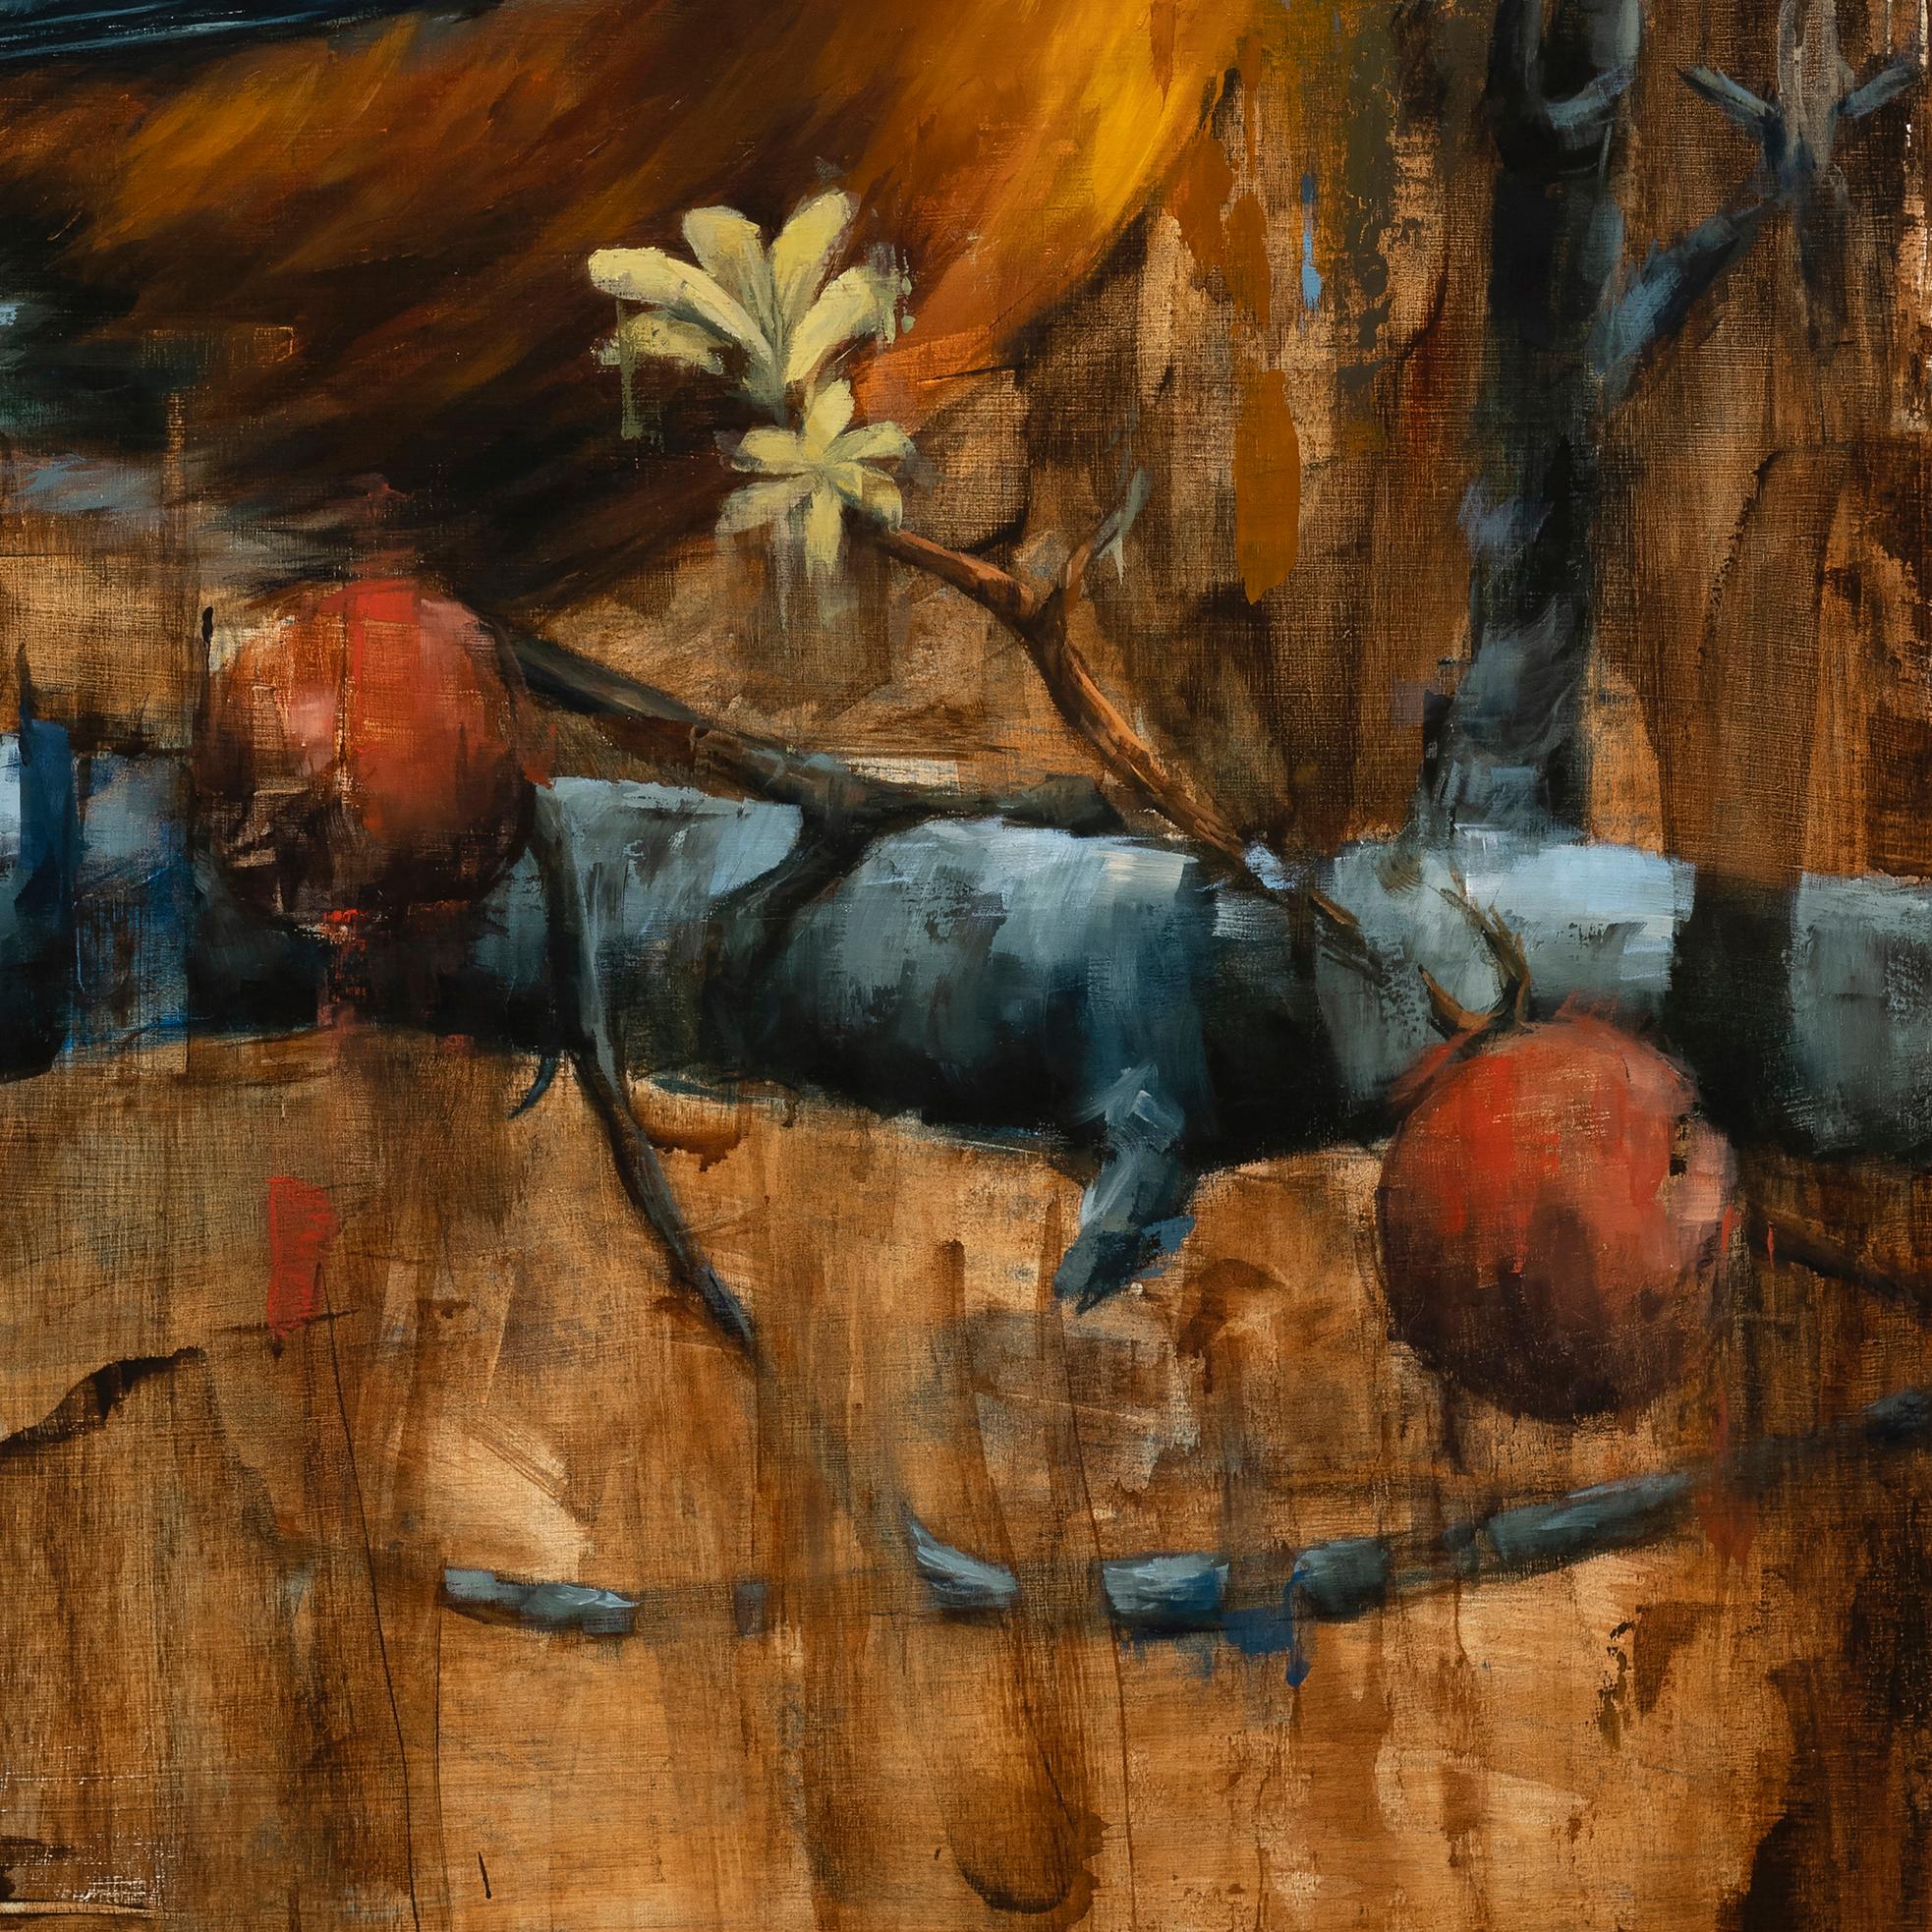 Morgan Cameron’s (US based) “Break From Flight” is an oil painting on panel that depicts a bird perched on a branch with fruit.  

This painting is unframed, but ready to hang.

About the artist: 

I am an oil painter based out of Southern Maine. My